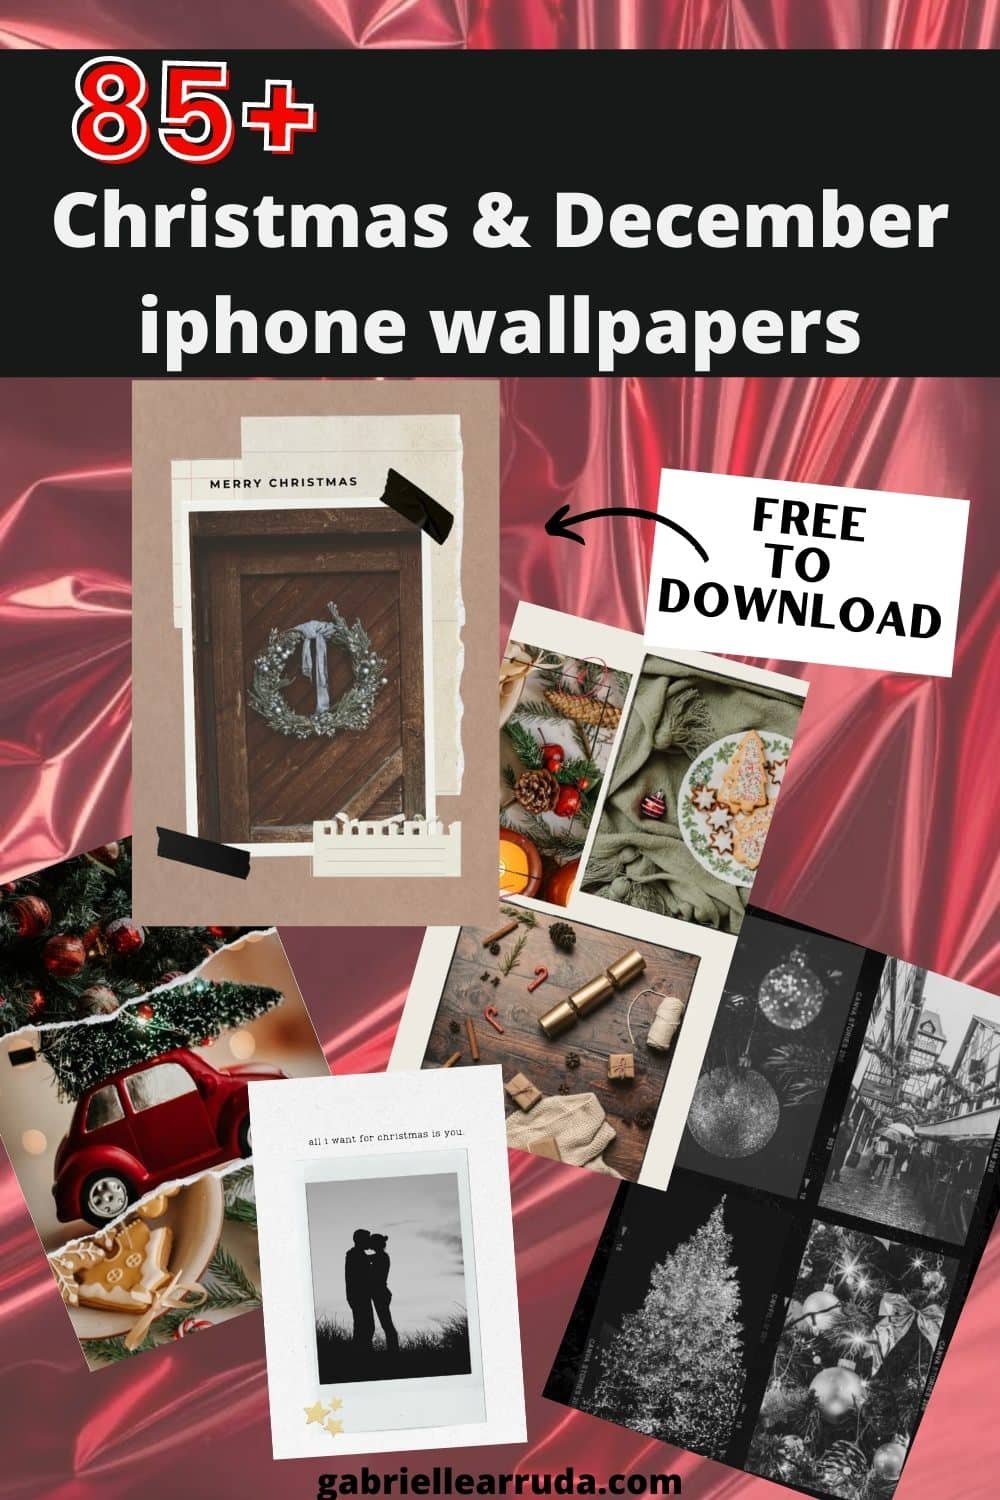 85+ free christmas and december iphone wallpapers 